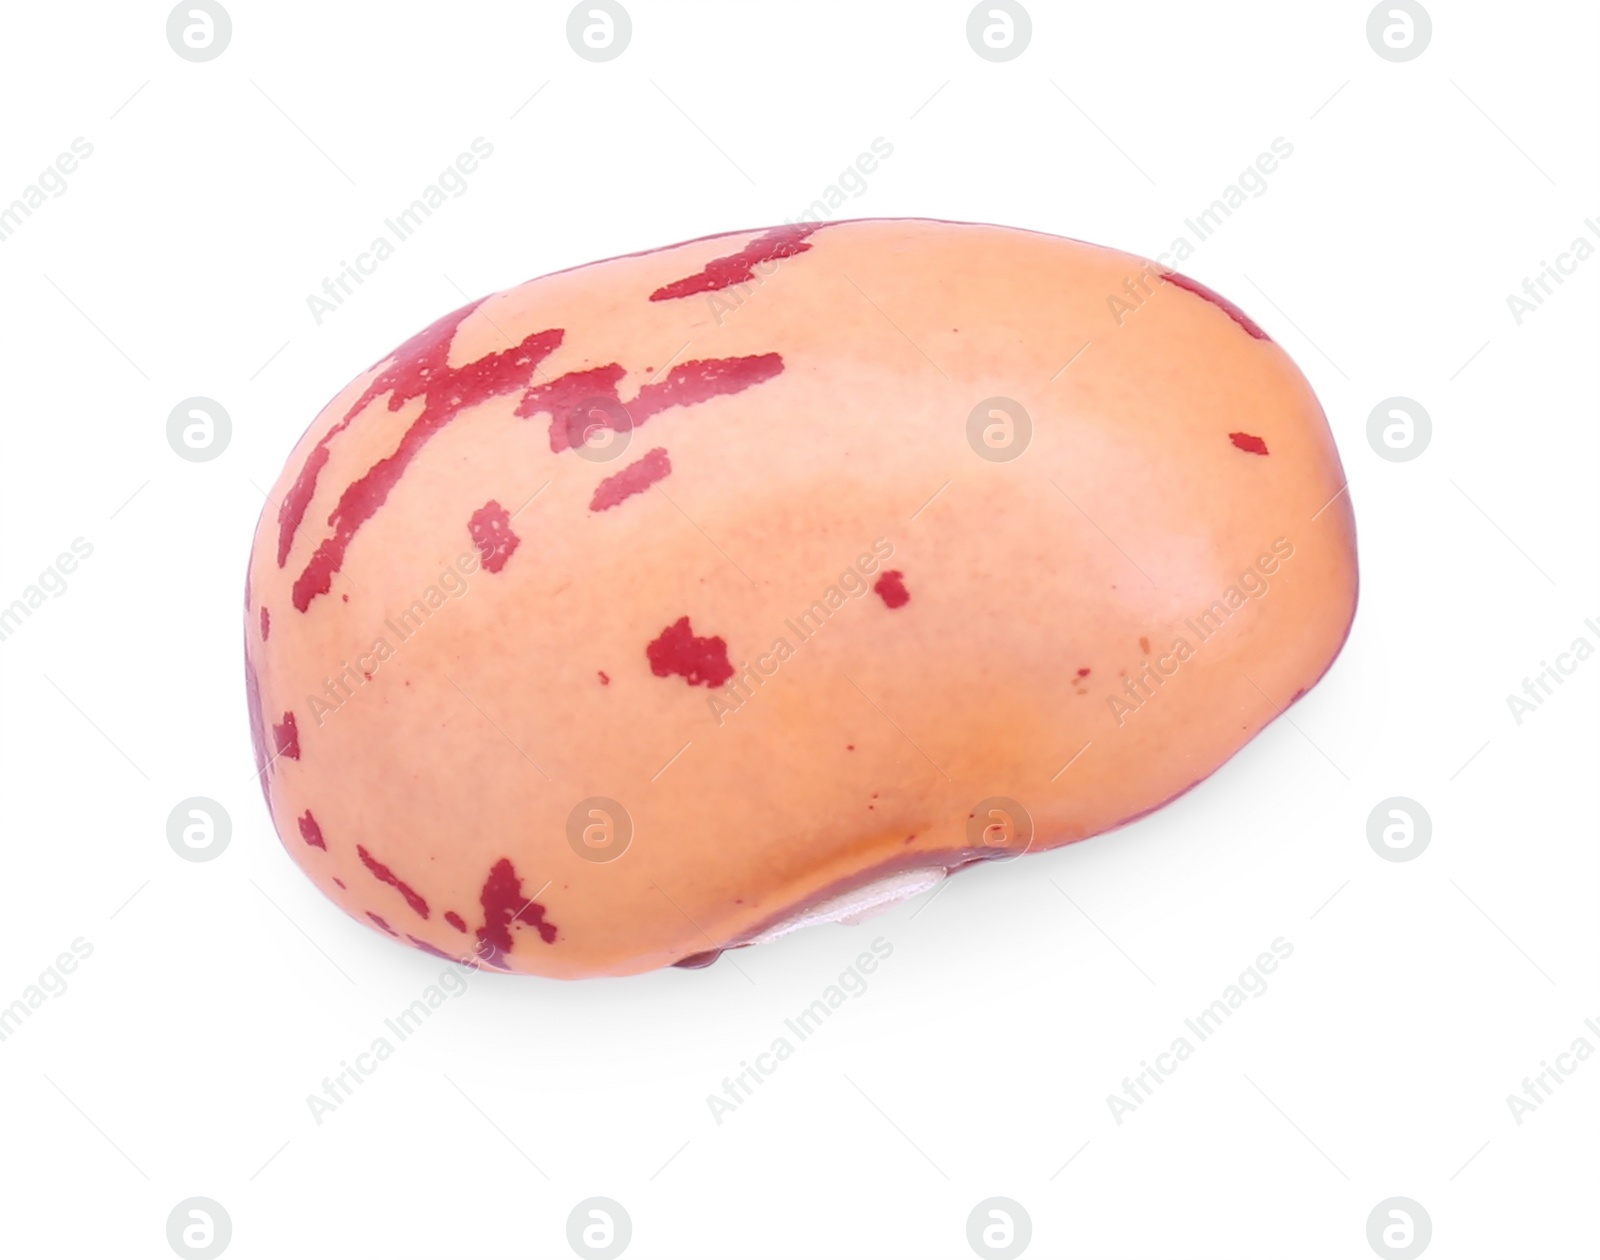 Photo of One raw kidney bean isolated on white